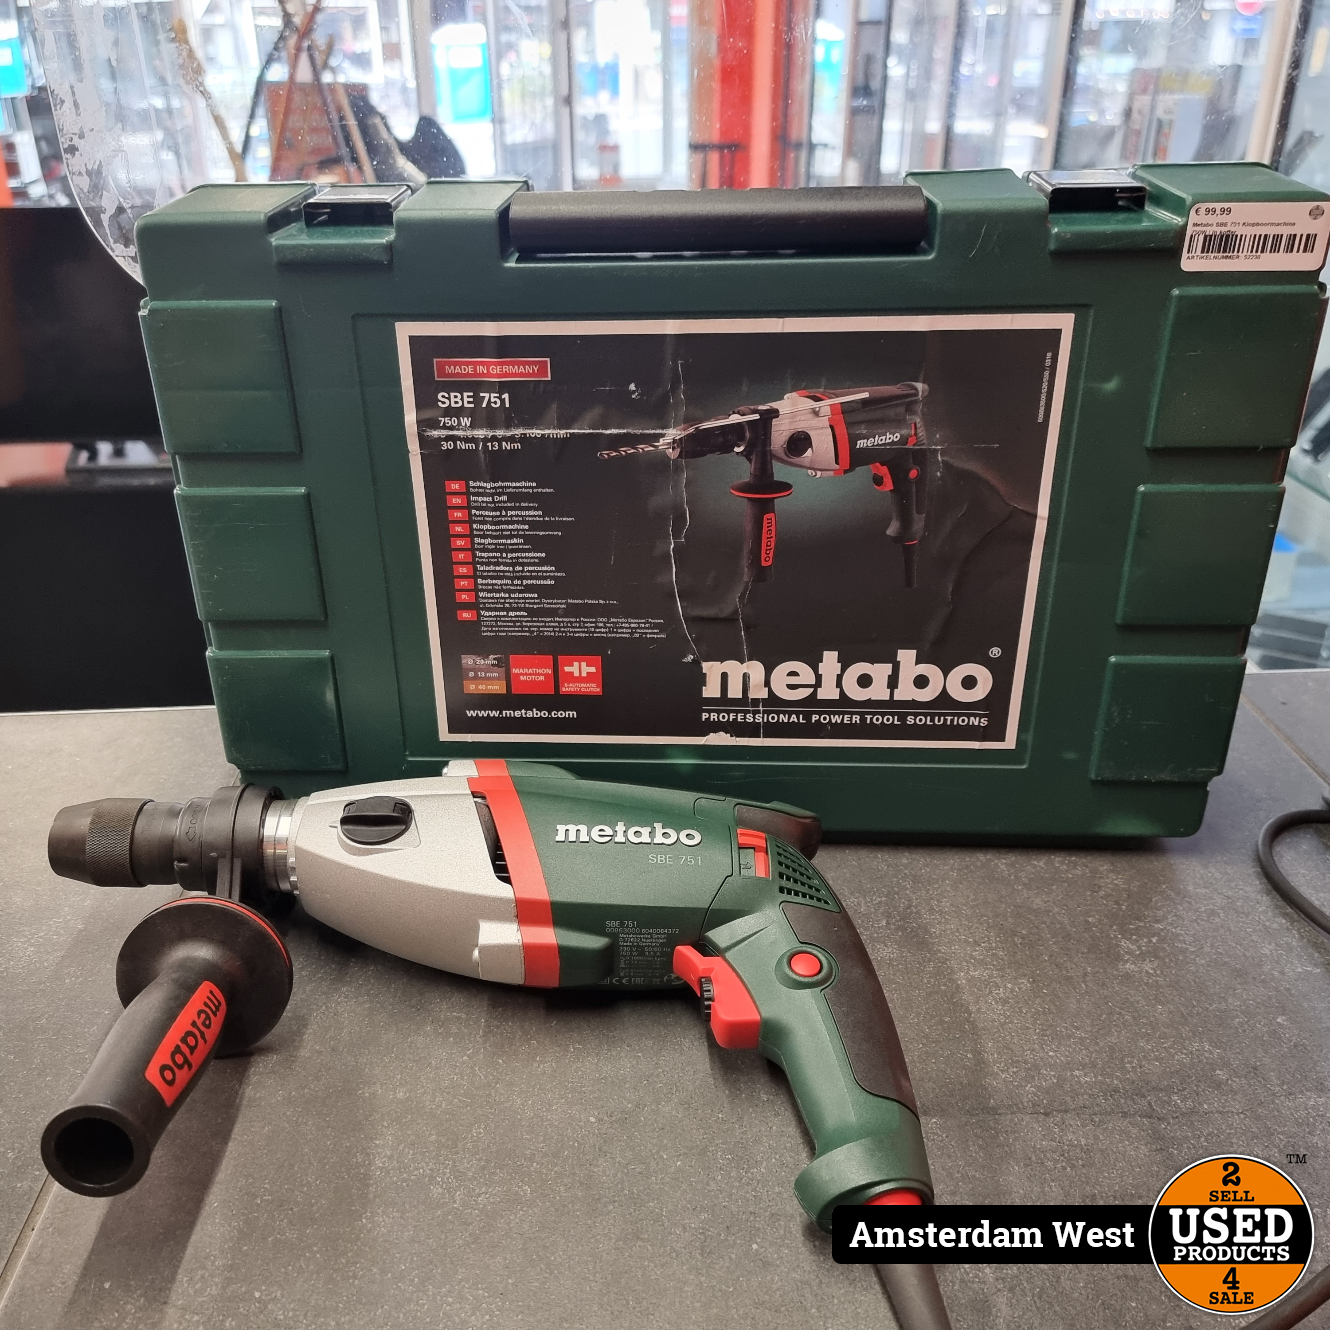 Metabo SBE 751 Klopboormachine 750W In koffer - Used Products Amsterdam West